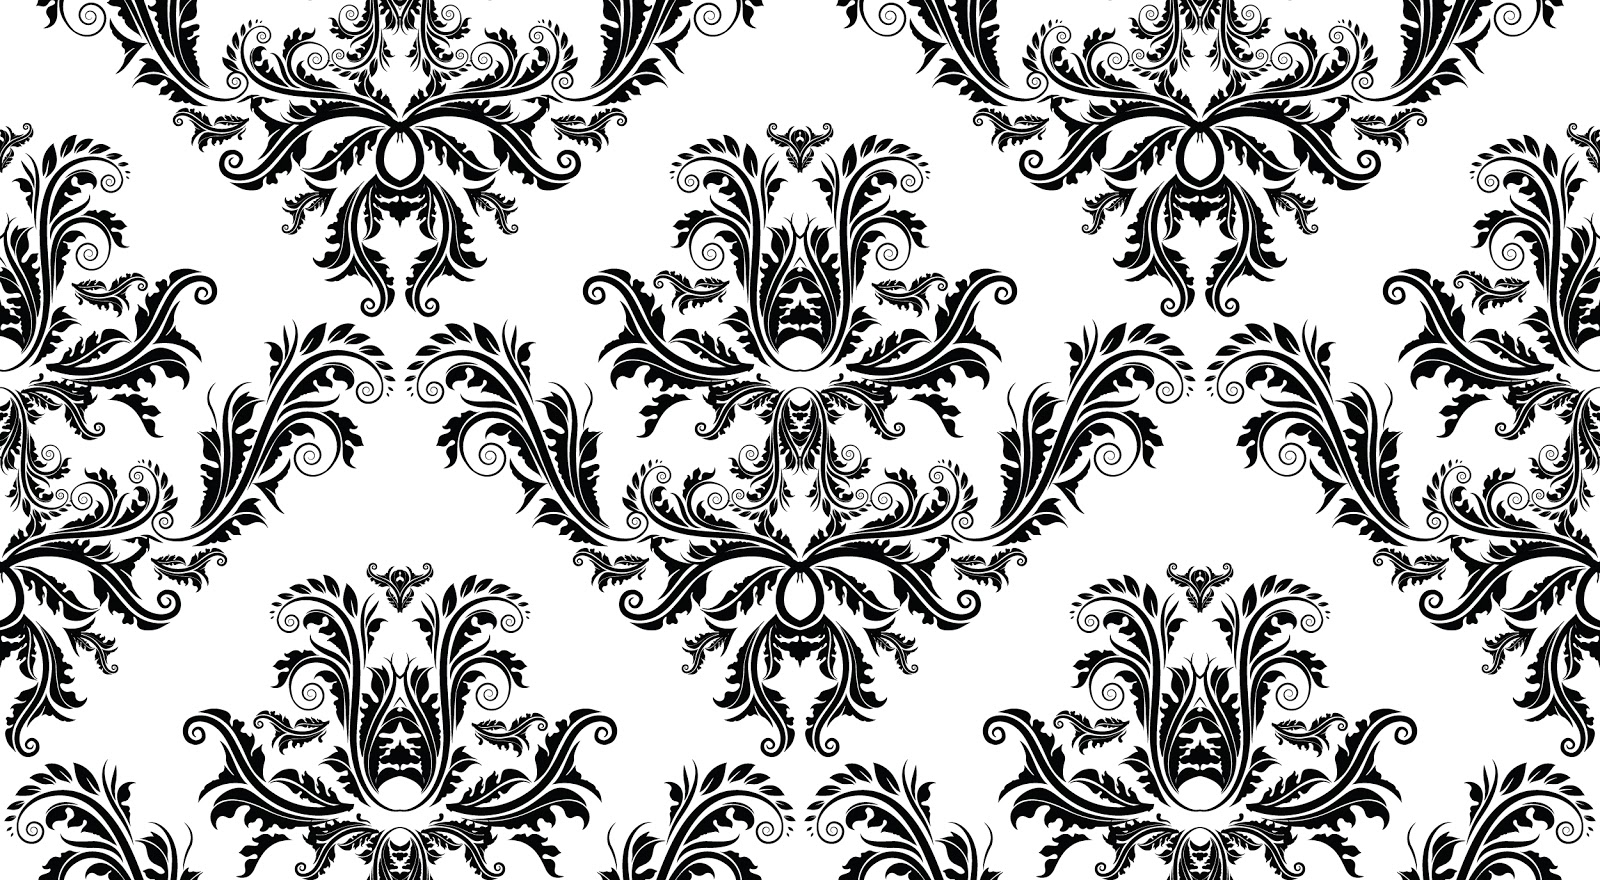 Damask pattern paper party supplies | damask pattern paper party